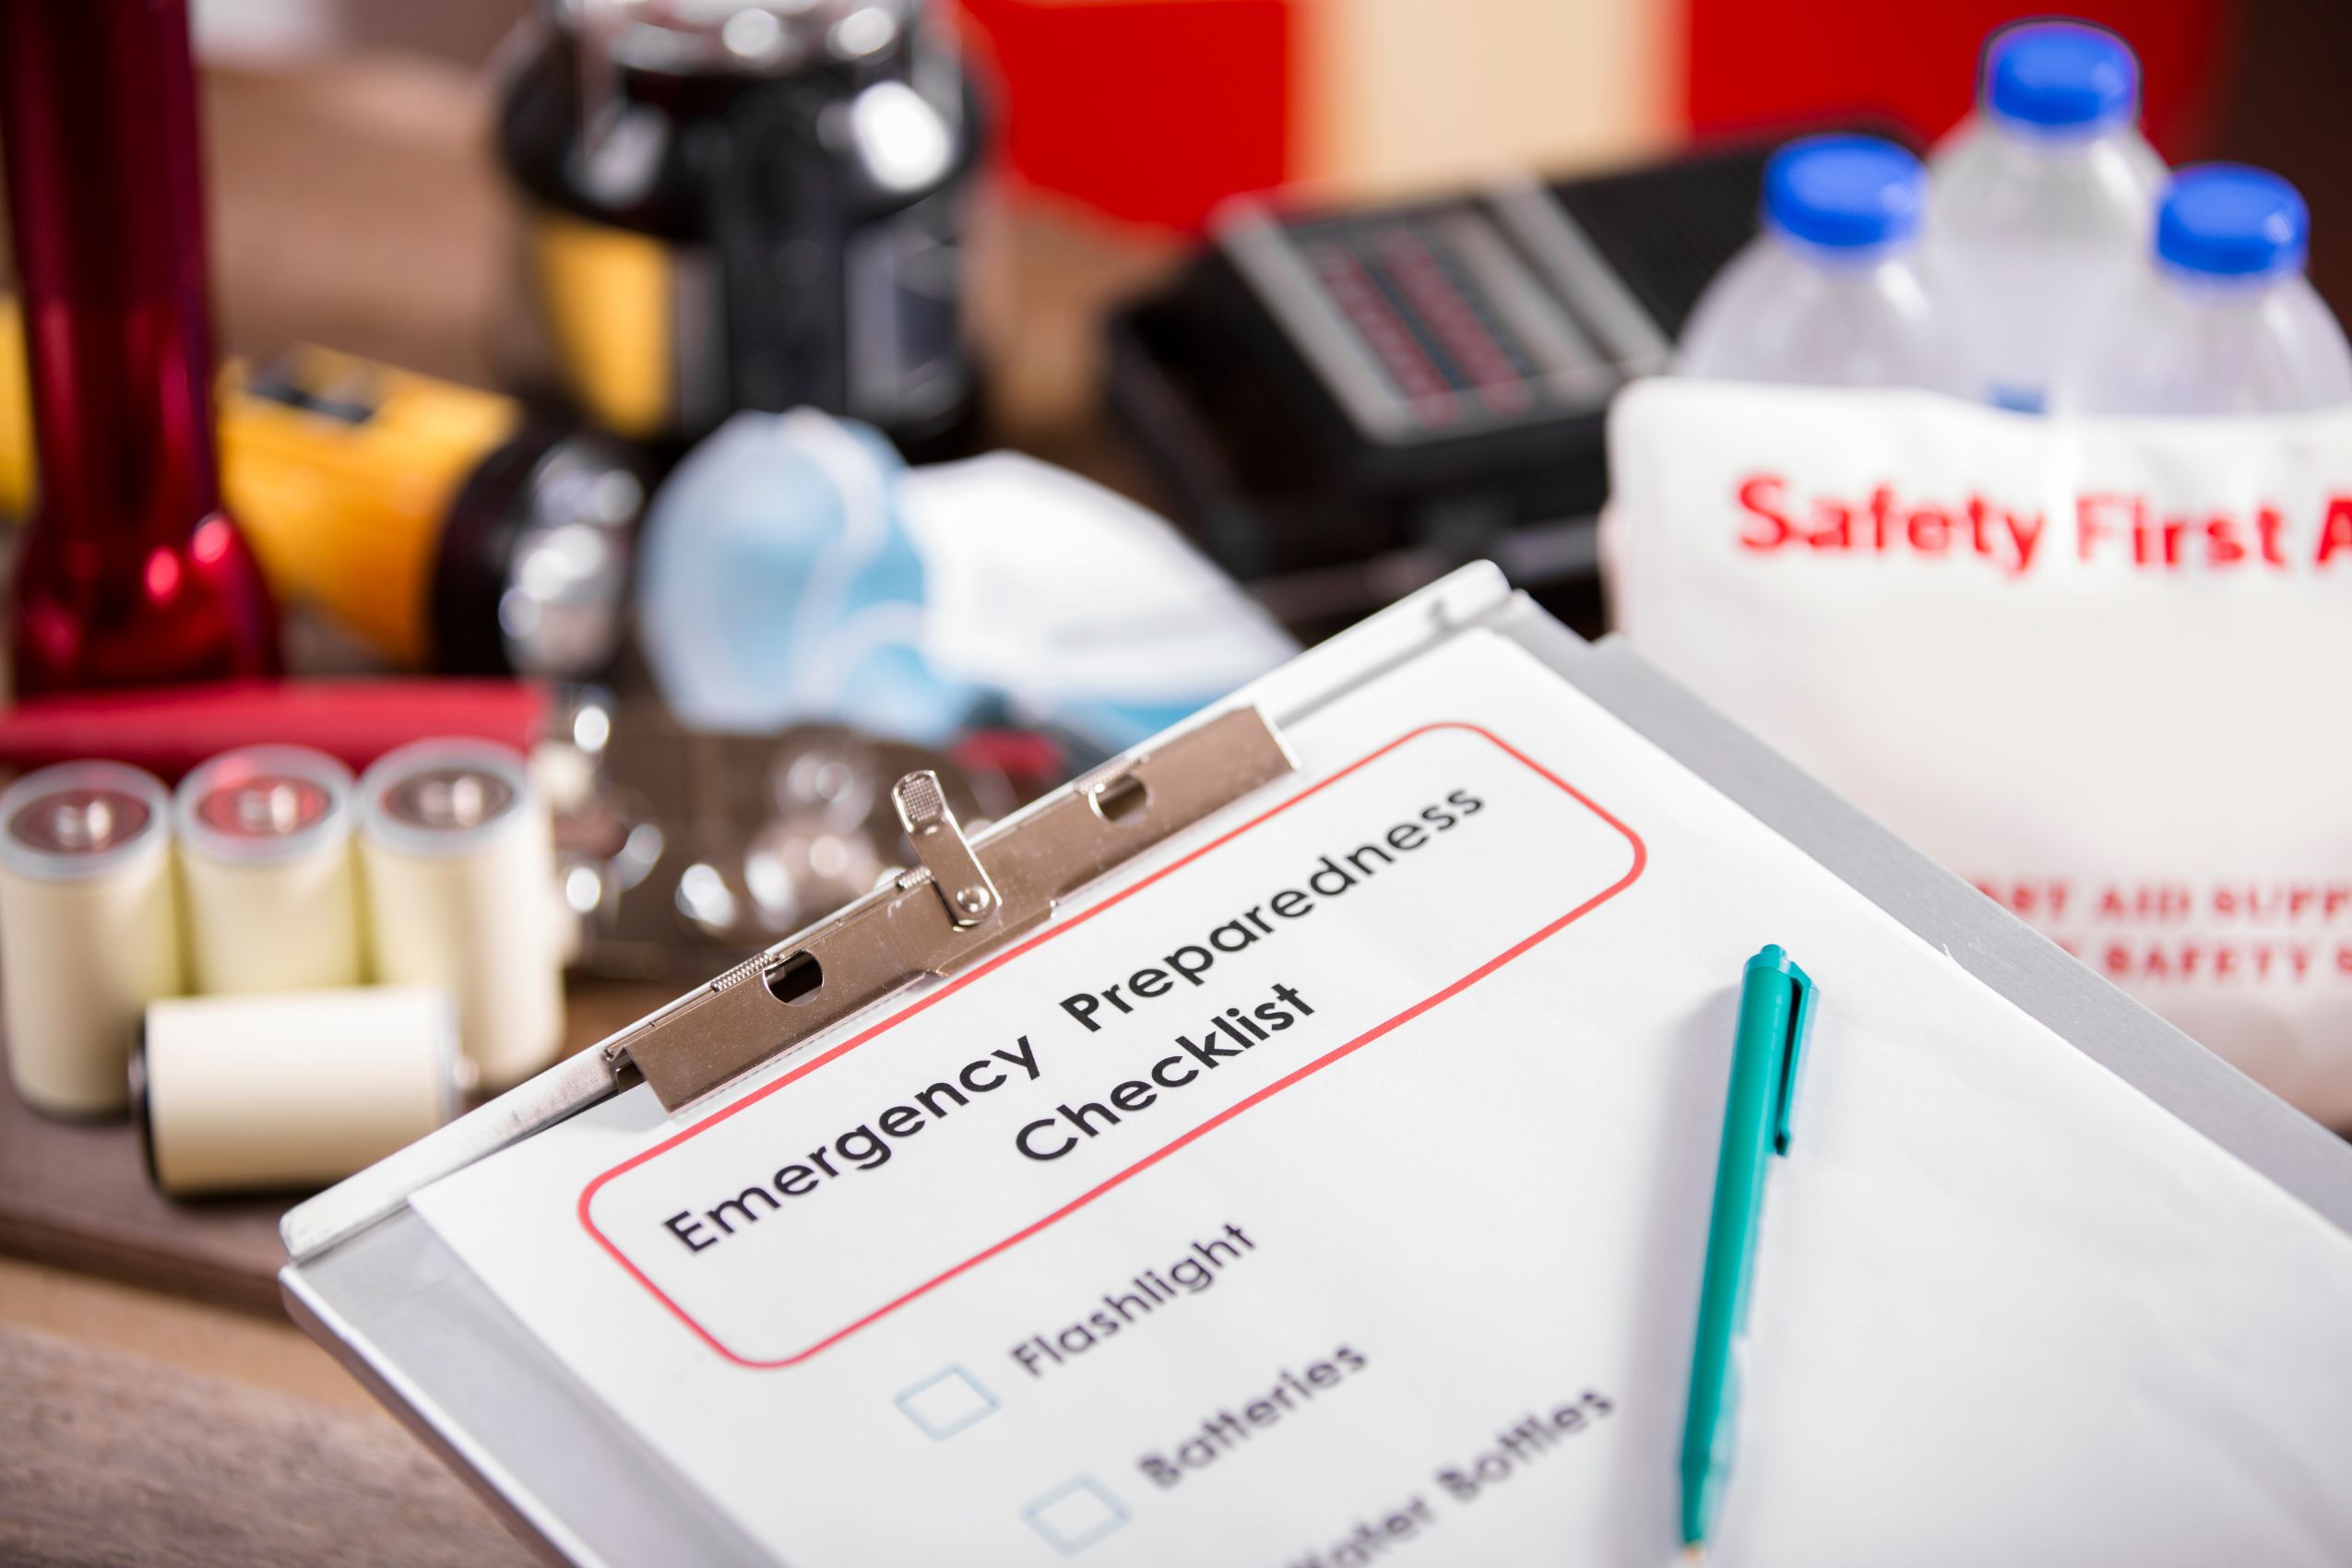 clipboard with checklist for emergency preparedness materials